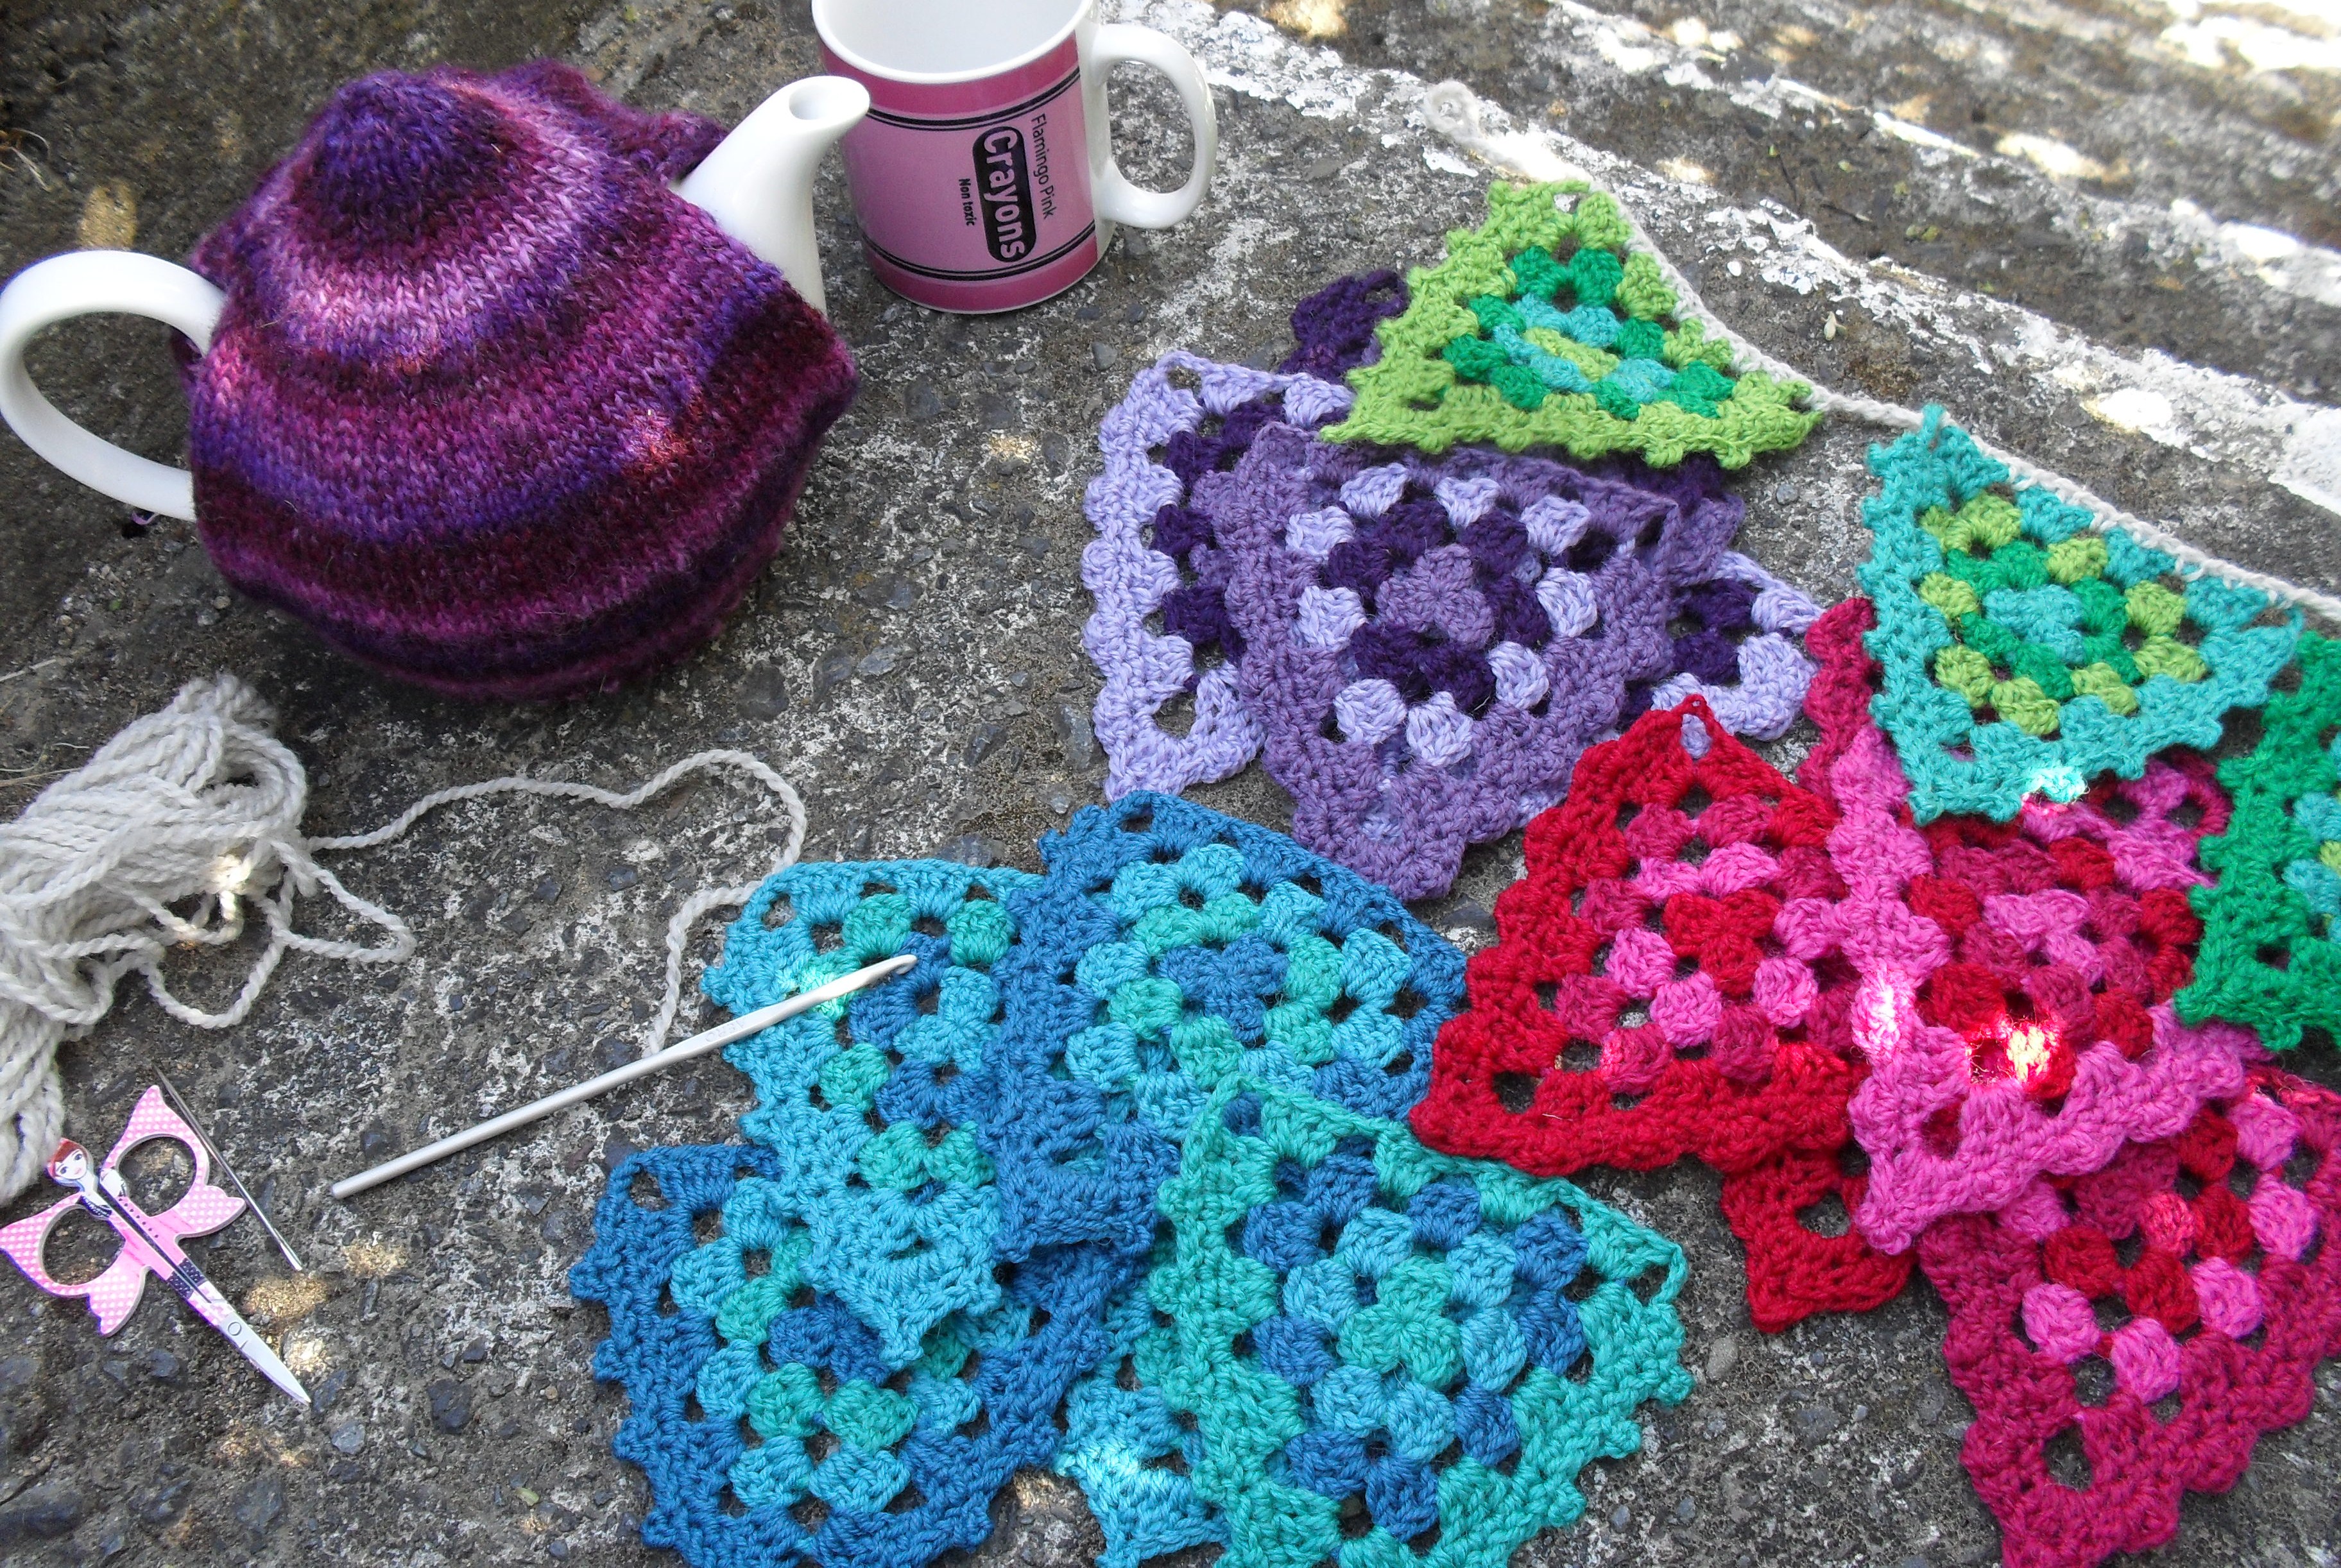 Free Crochet Baby Bunting Pattern
s - Crocheted Baby Buntings